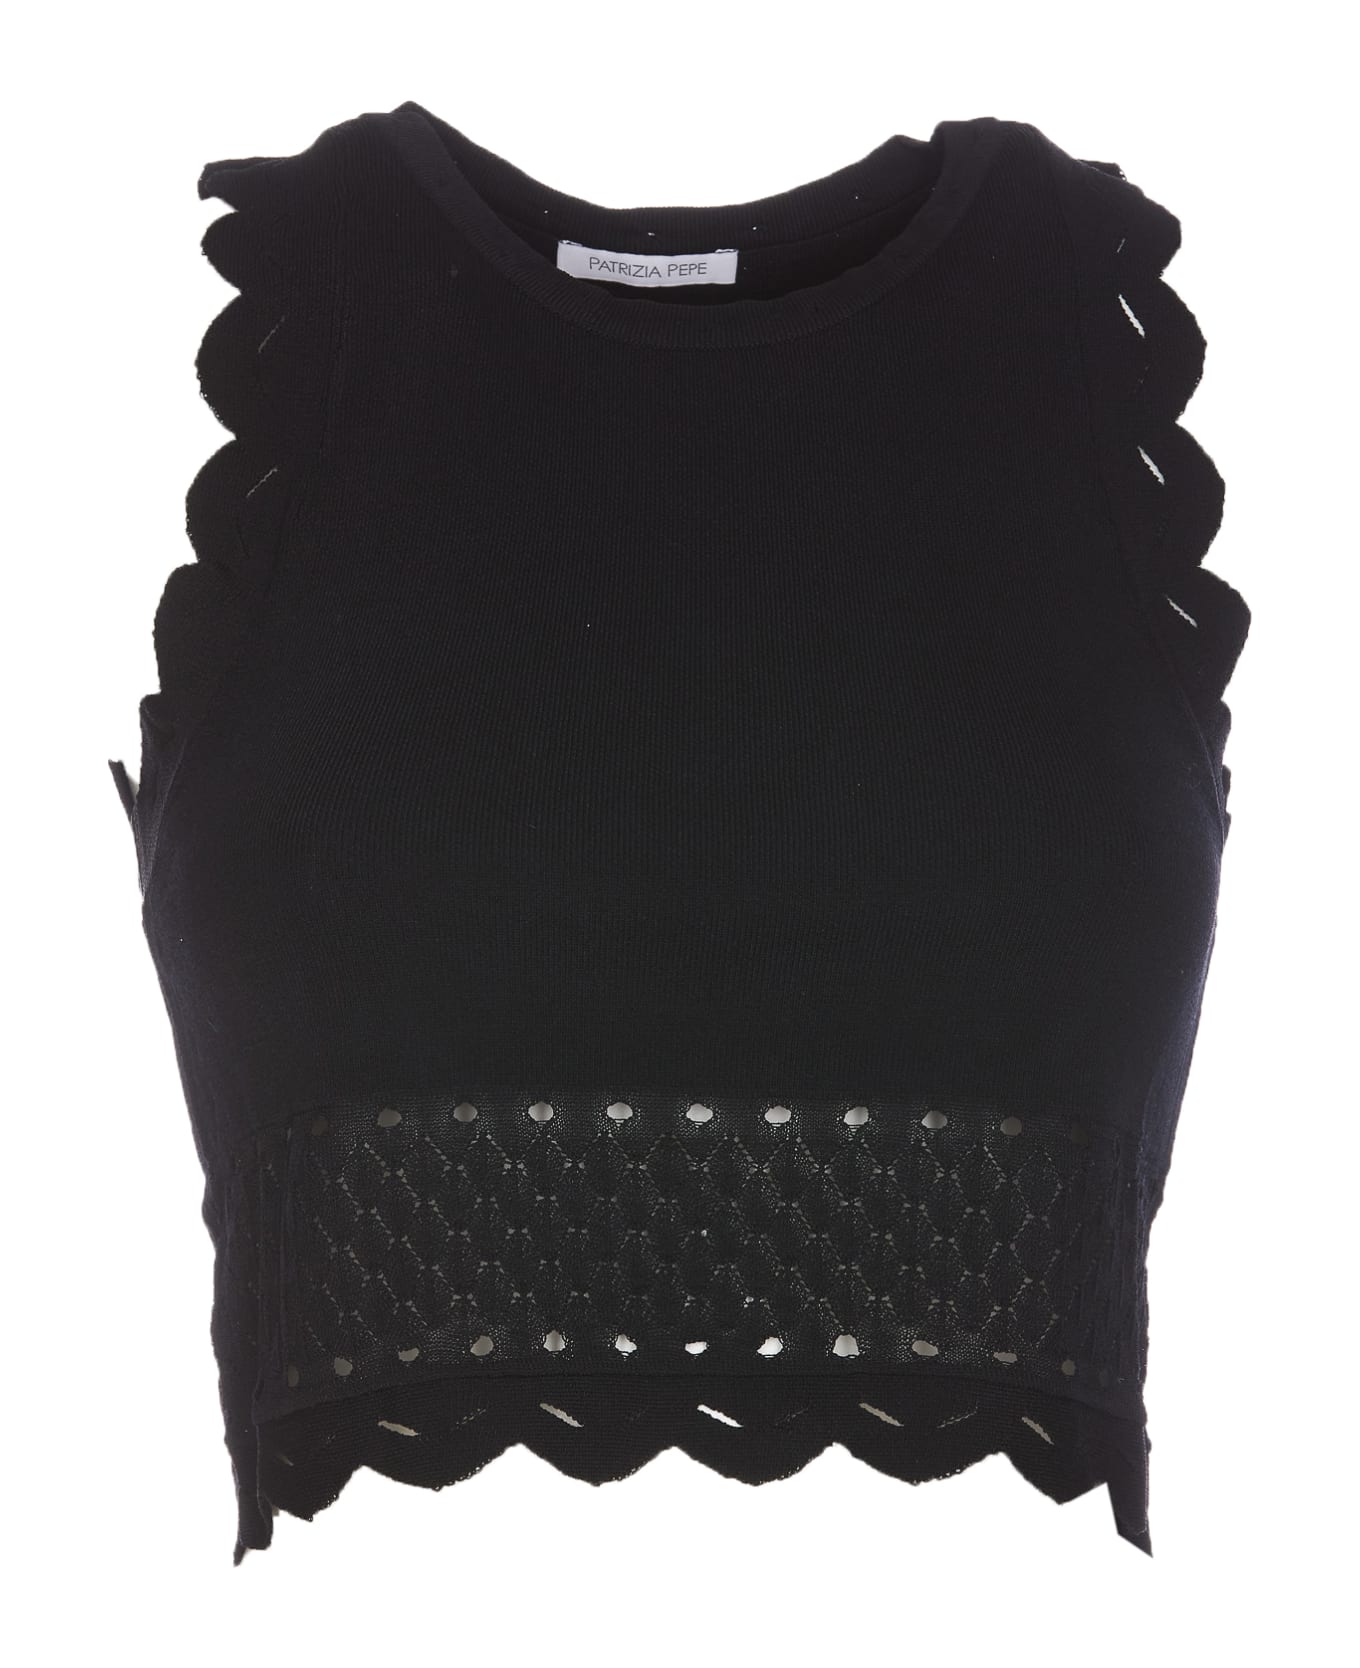 Patrizia Pepe Knitted Top - Black